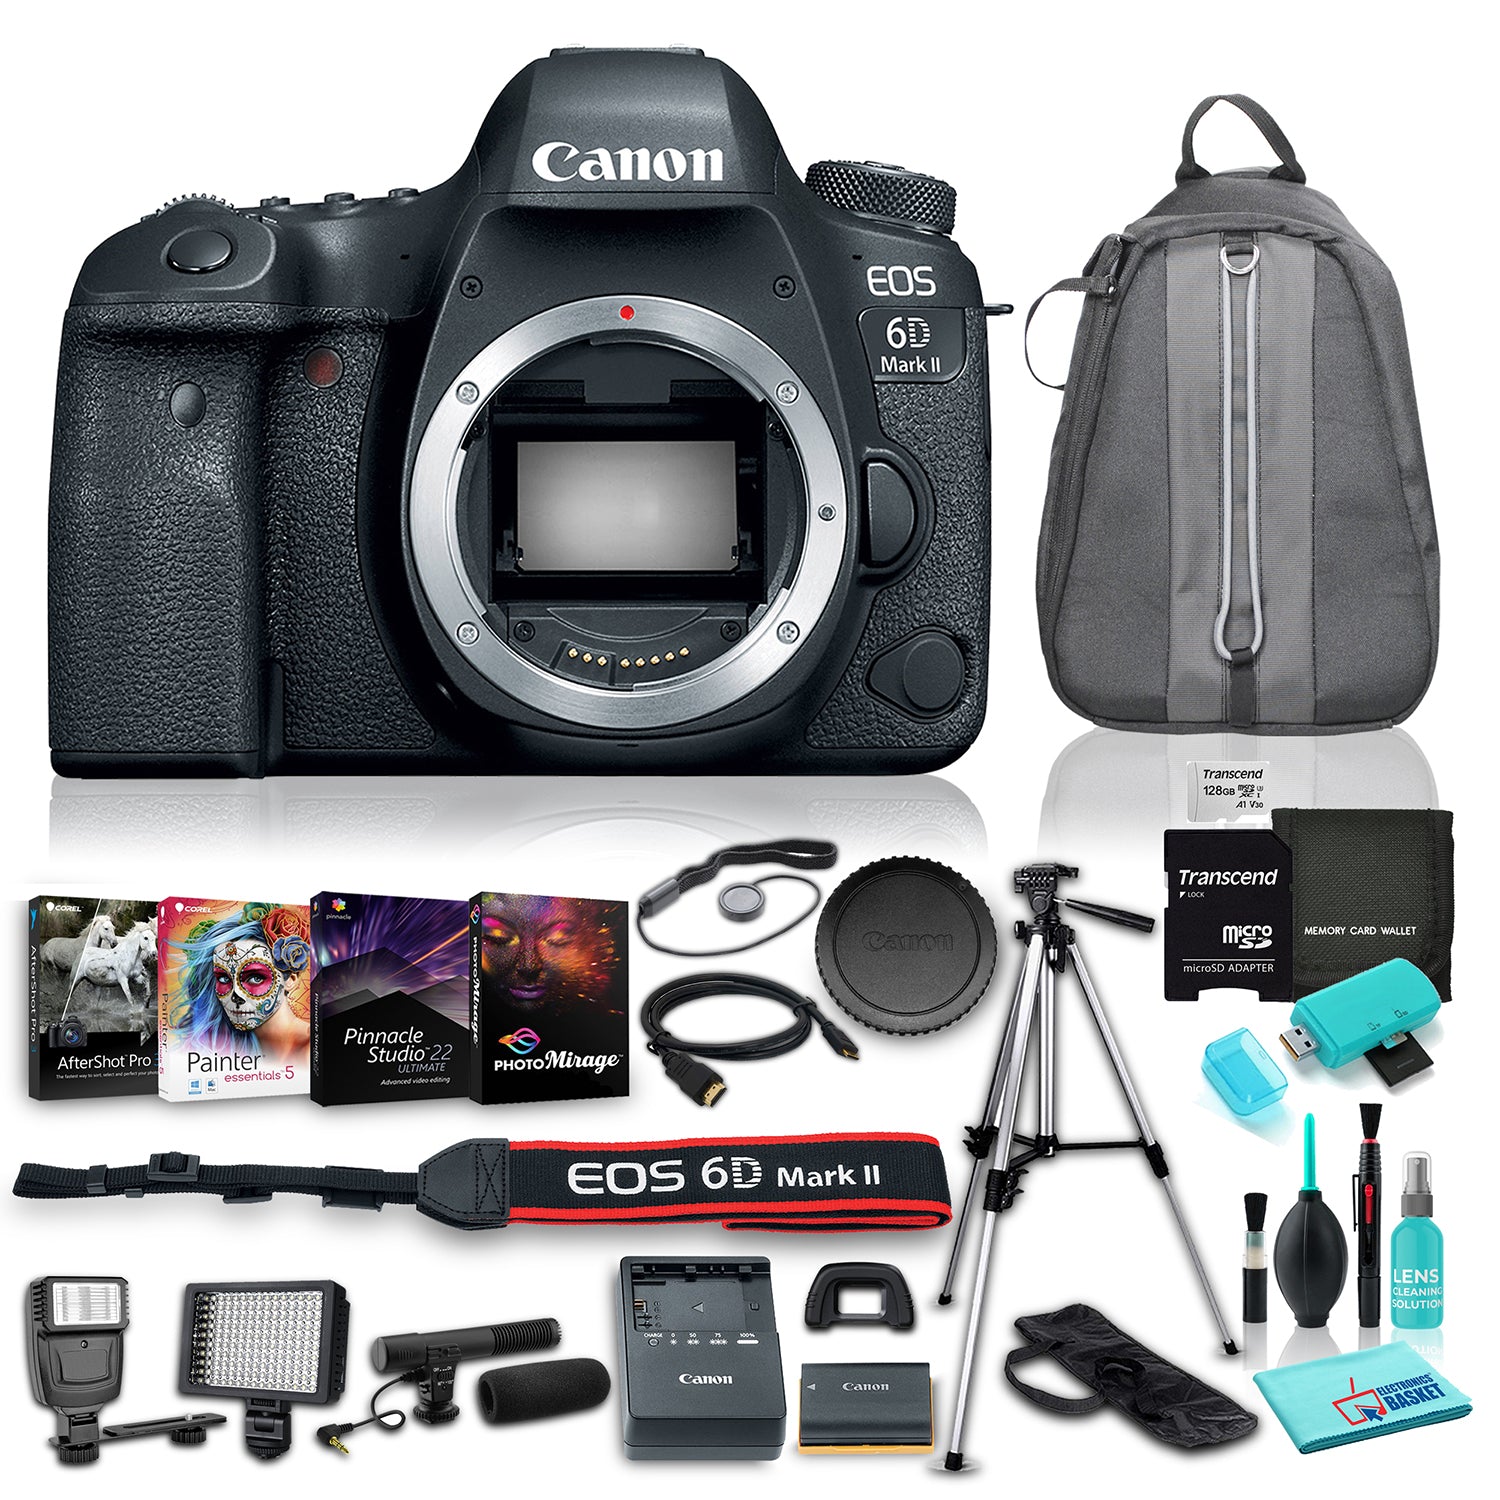 Canon EOS 6D Mark II DSLR Camera (Body Only), 45-Point All-Cross Type AF System, DIGIC 7 Image Processor w/ 13 Piece Accessories